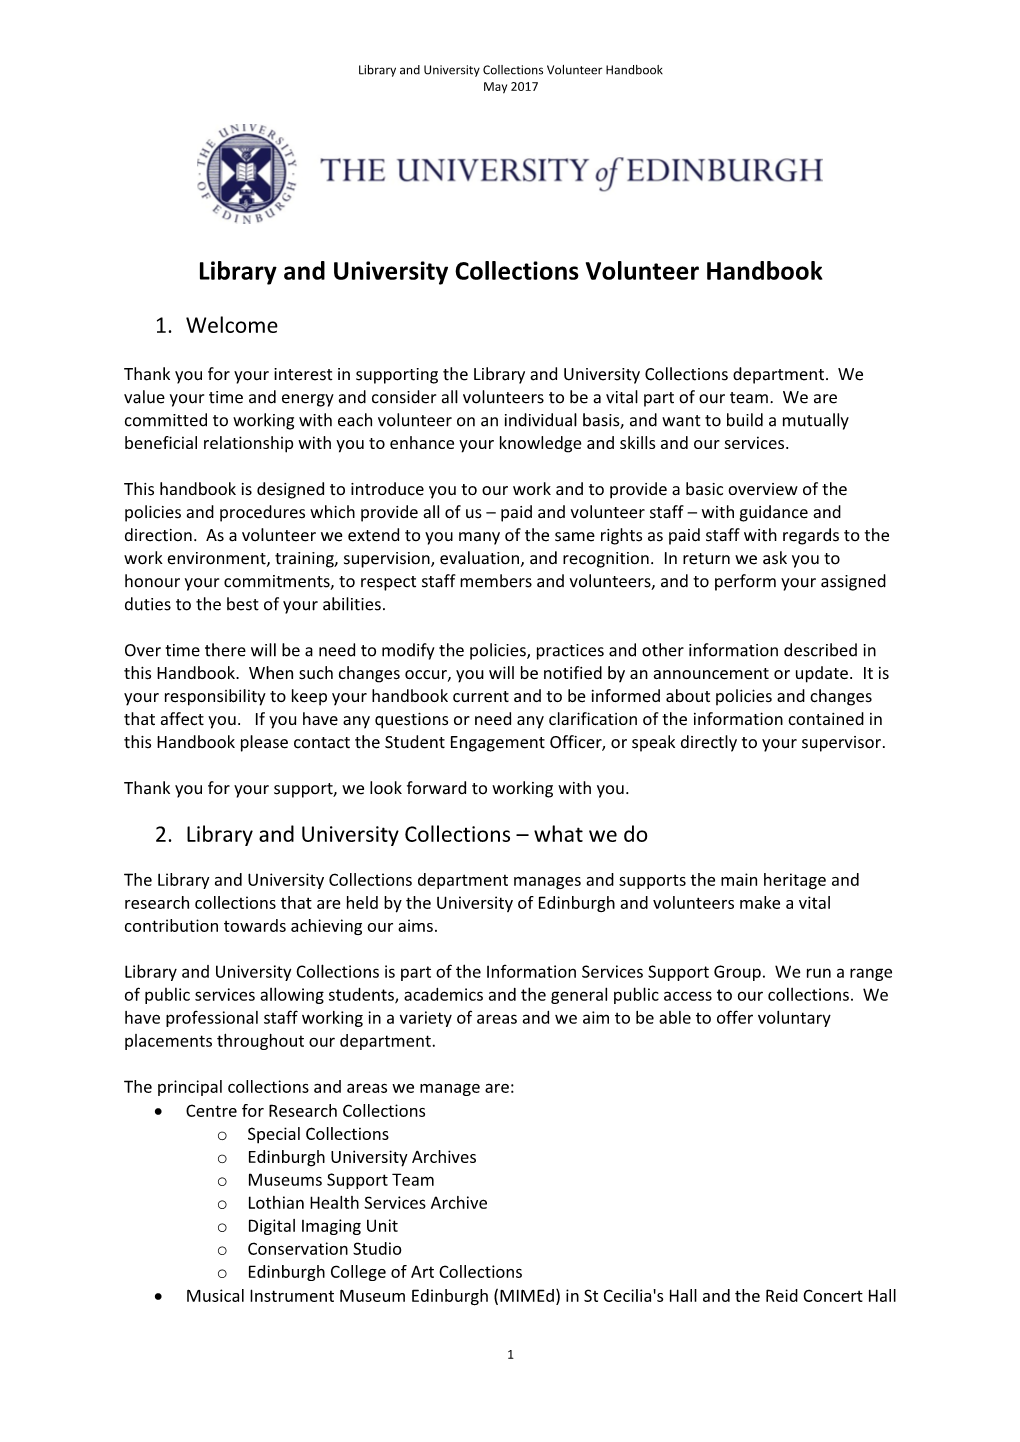 Library and University Collections Volunteer Handbook May 2017